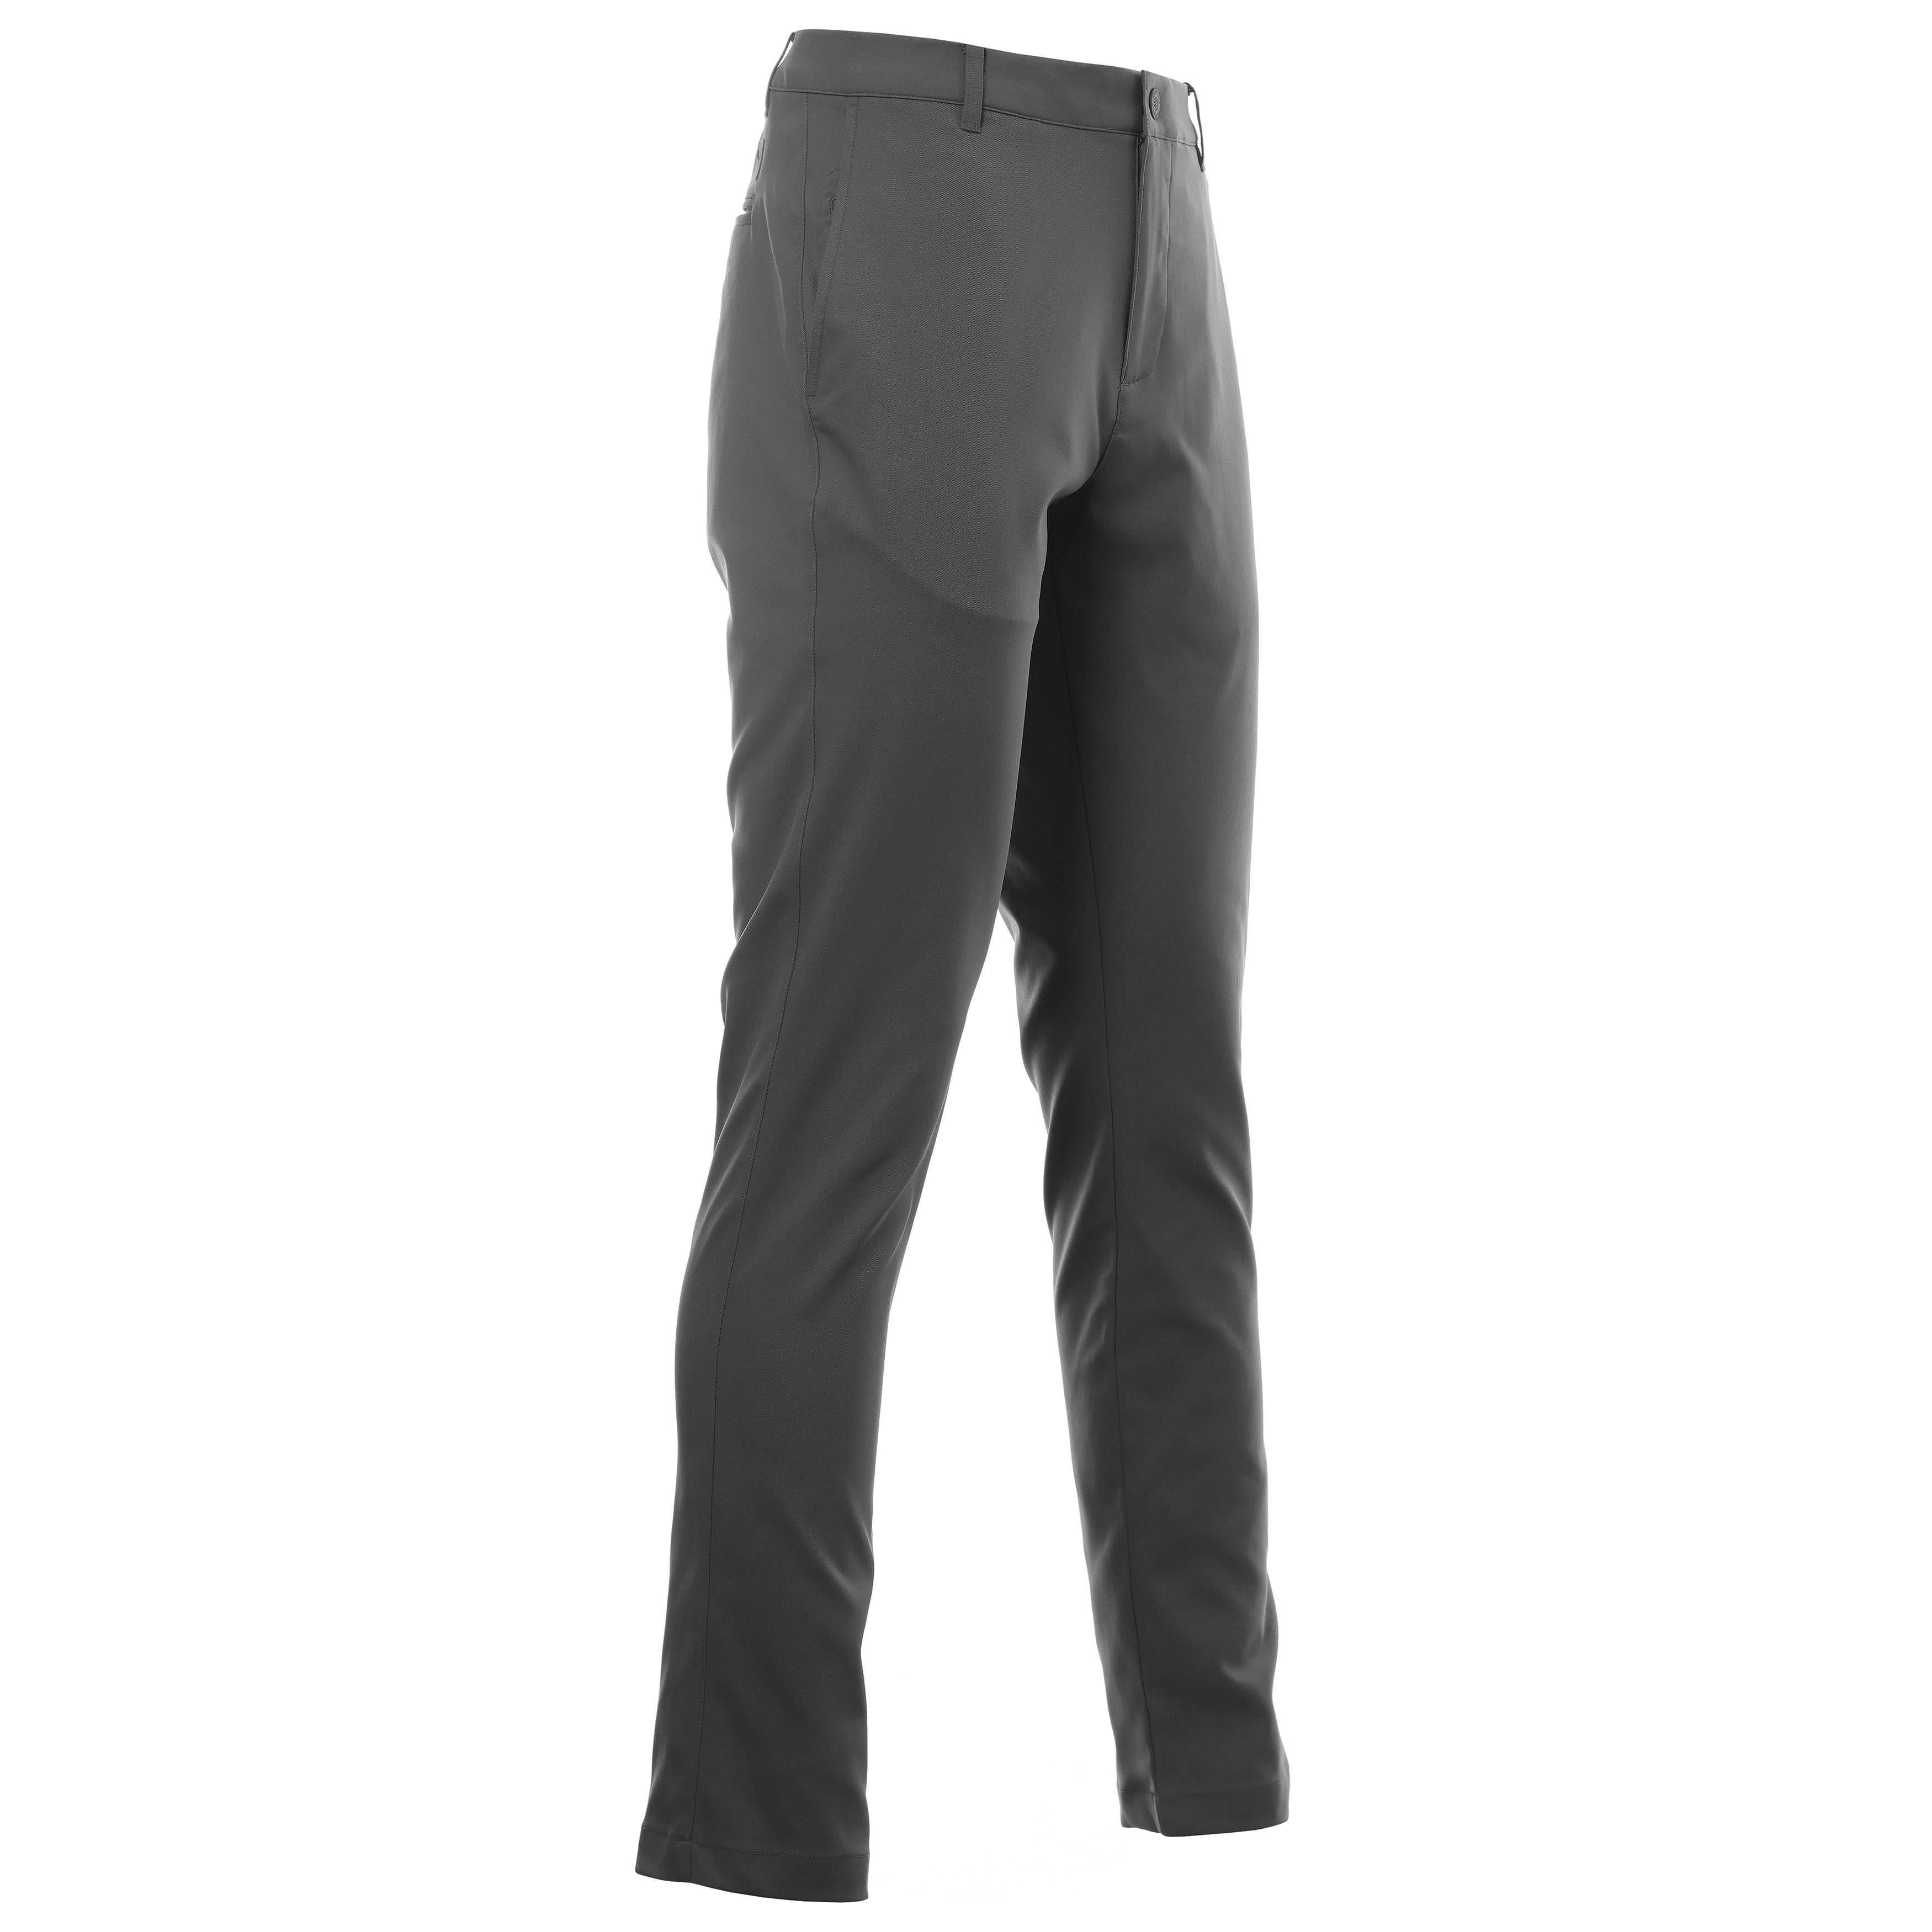 Tommp Slim Stretch Tailored Pant - Black - Tommp Slim Stretch Tailored Pant, Suit Pants